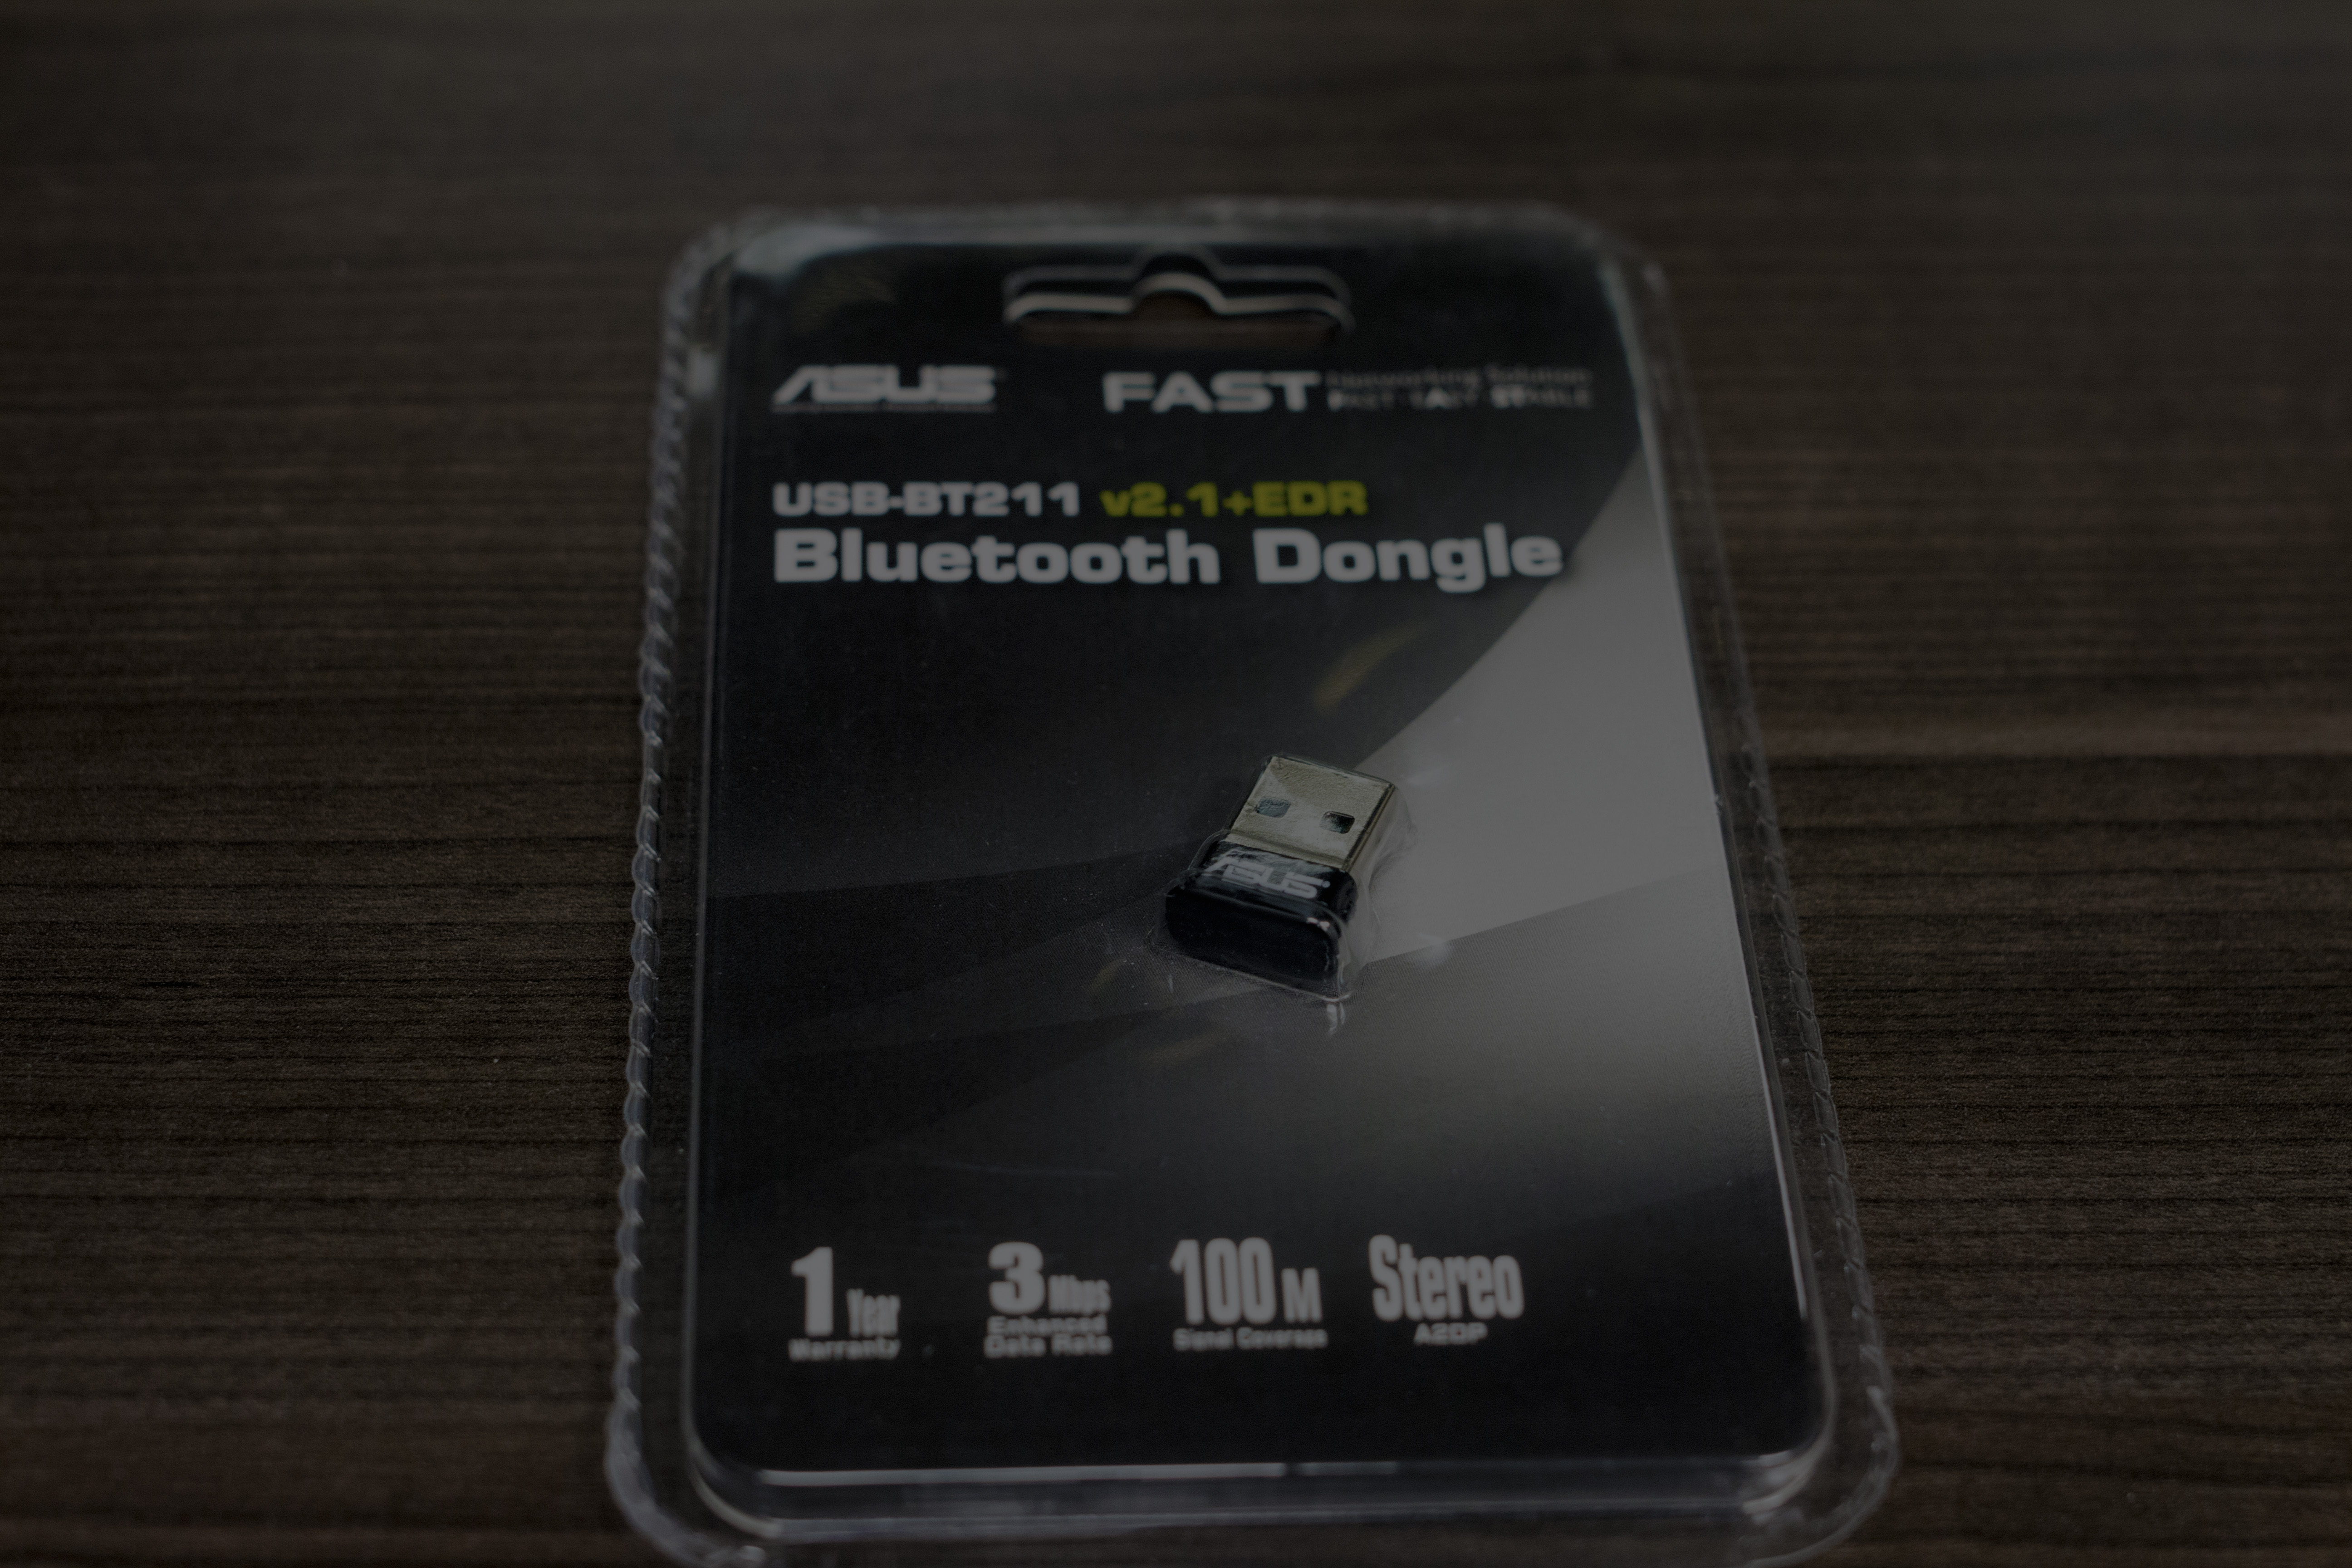 how to pair a new device with asus usb bt400